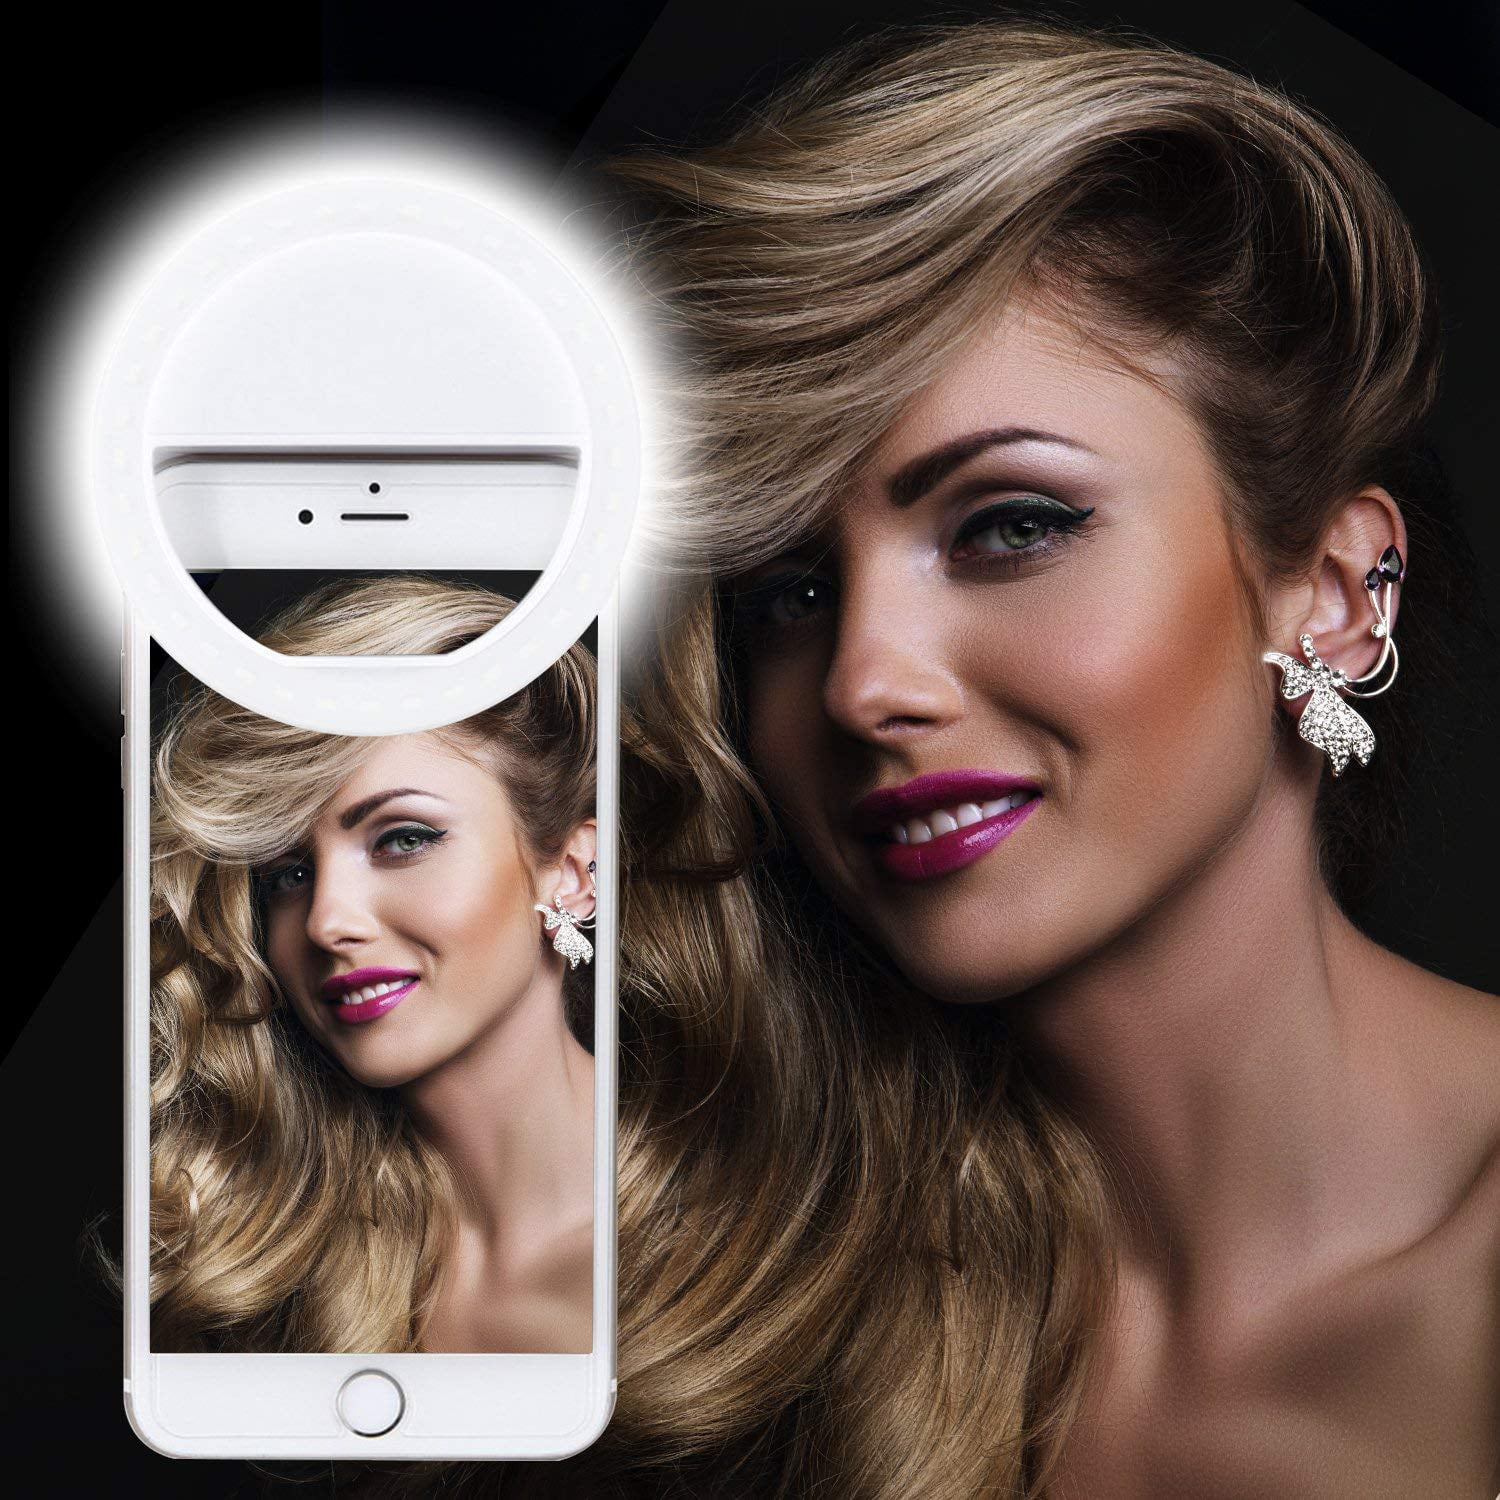 Phone Ring Light Selfie Ring Light With 36 LED Bulbs Portable Selfie Lights for Live Stream and Makeup Pink